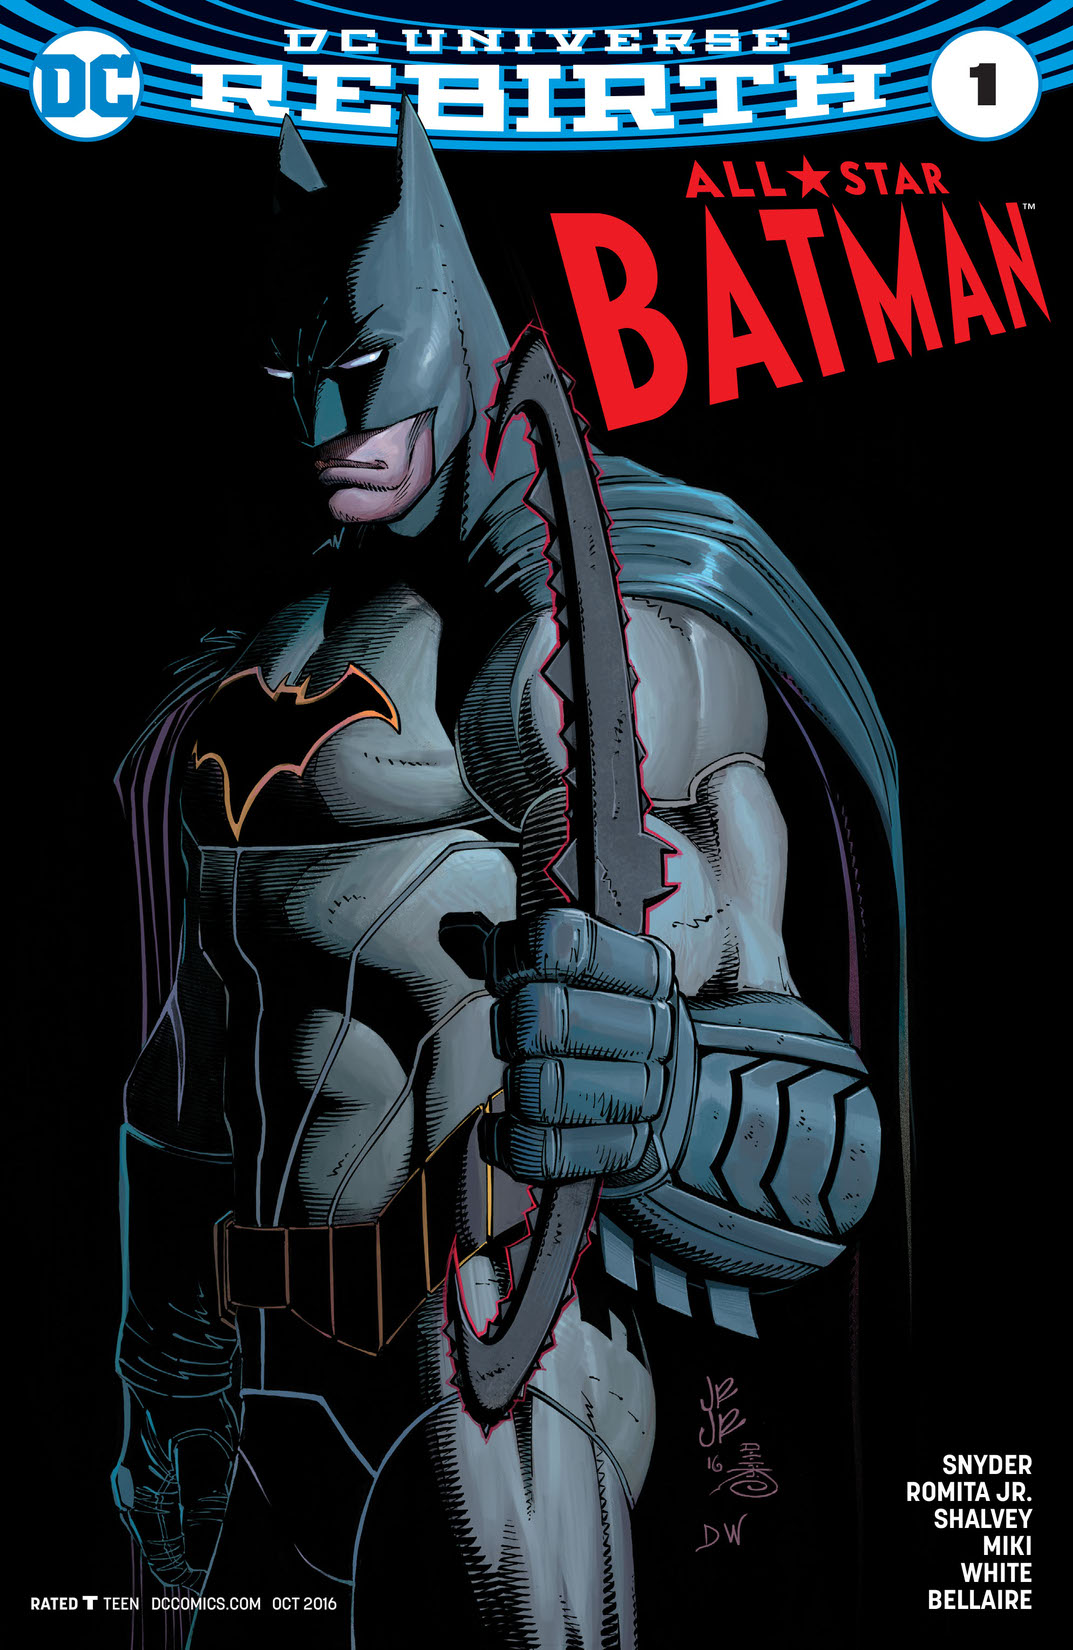 All Star Batman #1 preview images